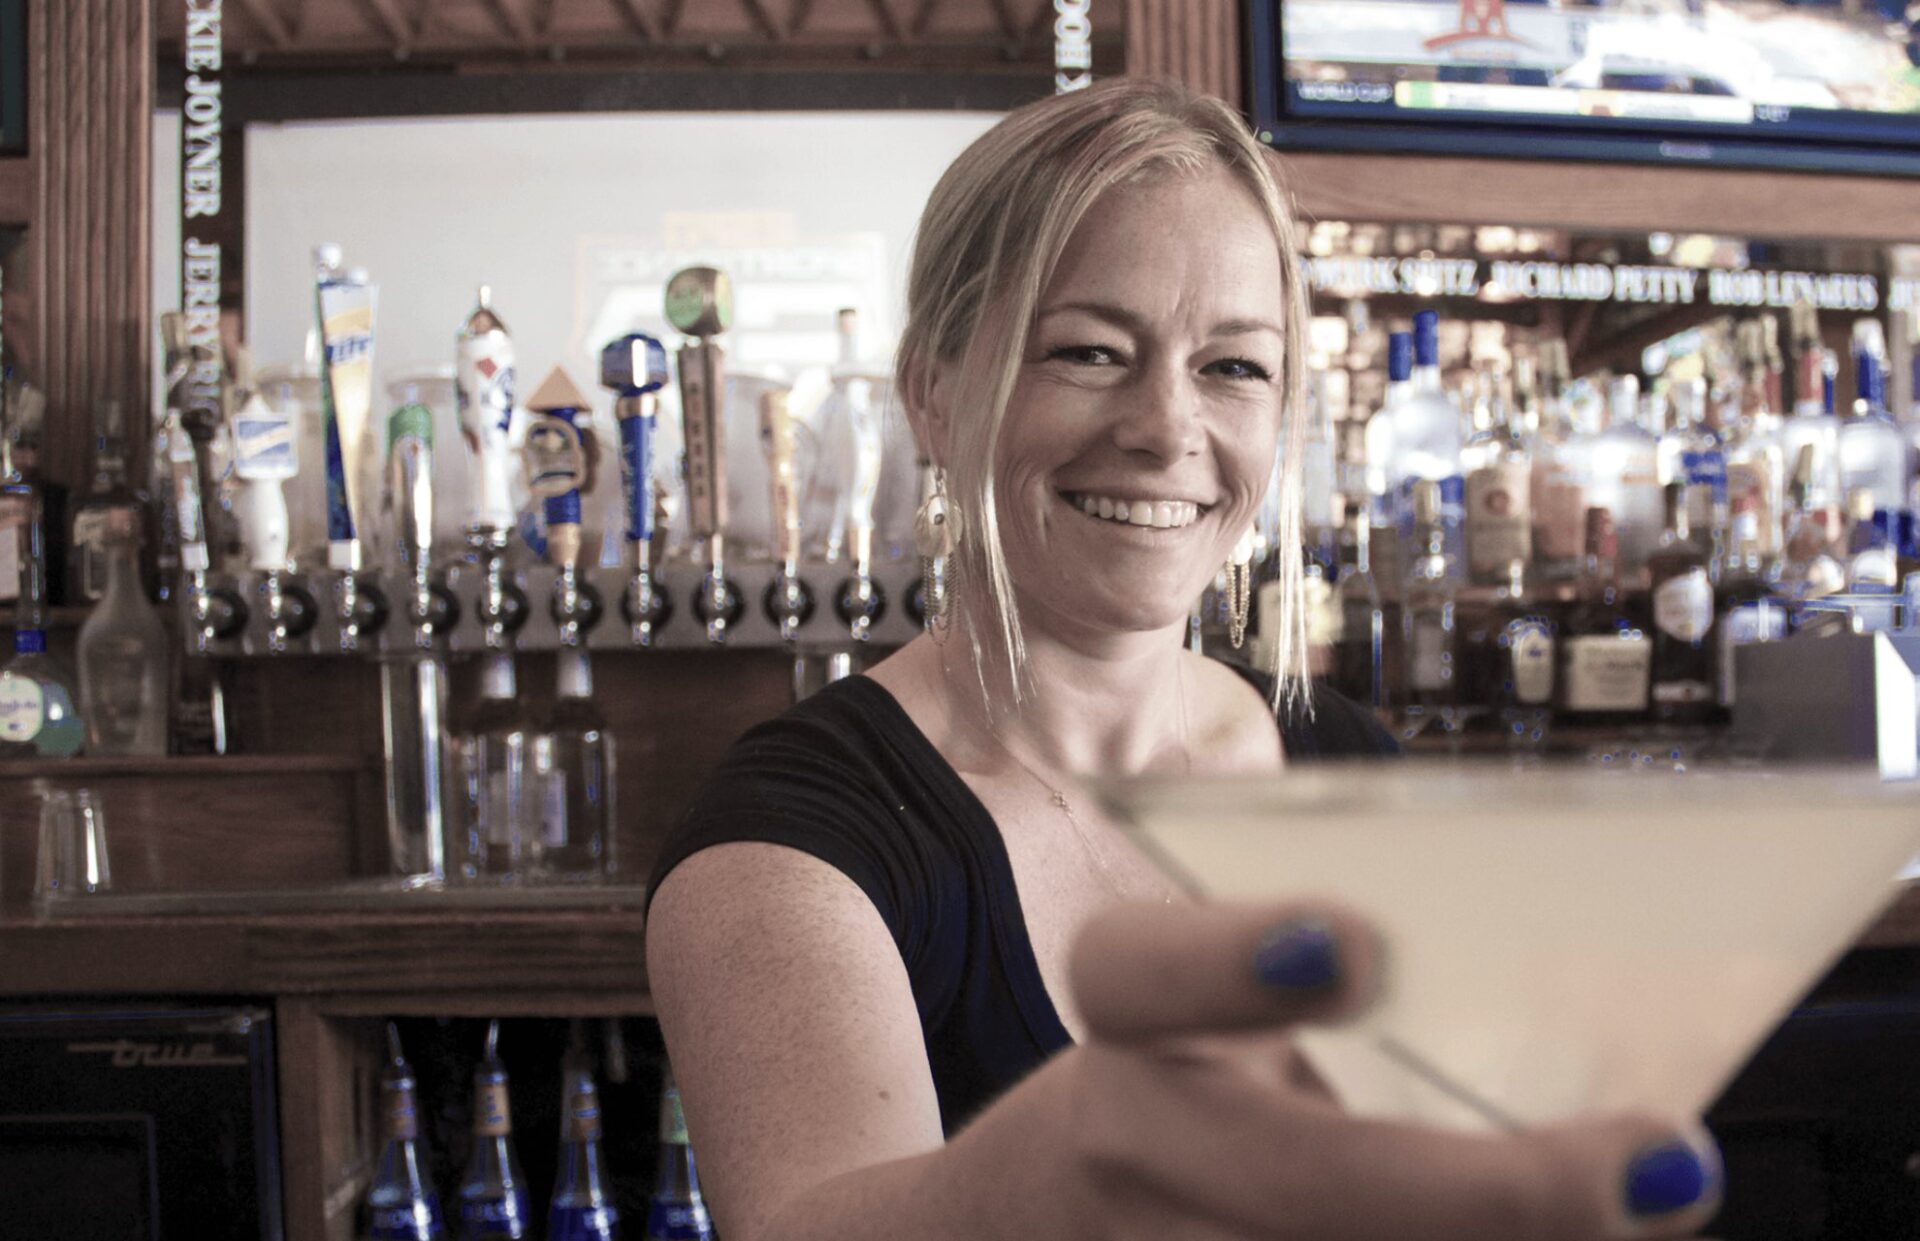 This picture depicts Rebecca Hinderer during her time spent as head bar tender at Legends Sports Bar. Rebecca now owns her own restaurant on Belmont Shore!